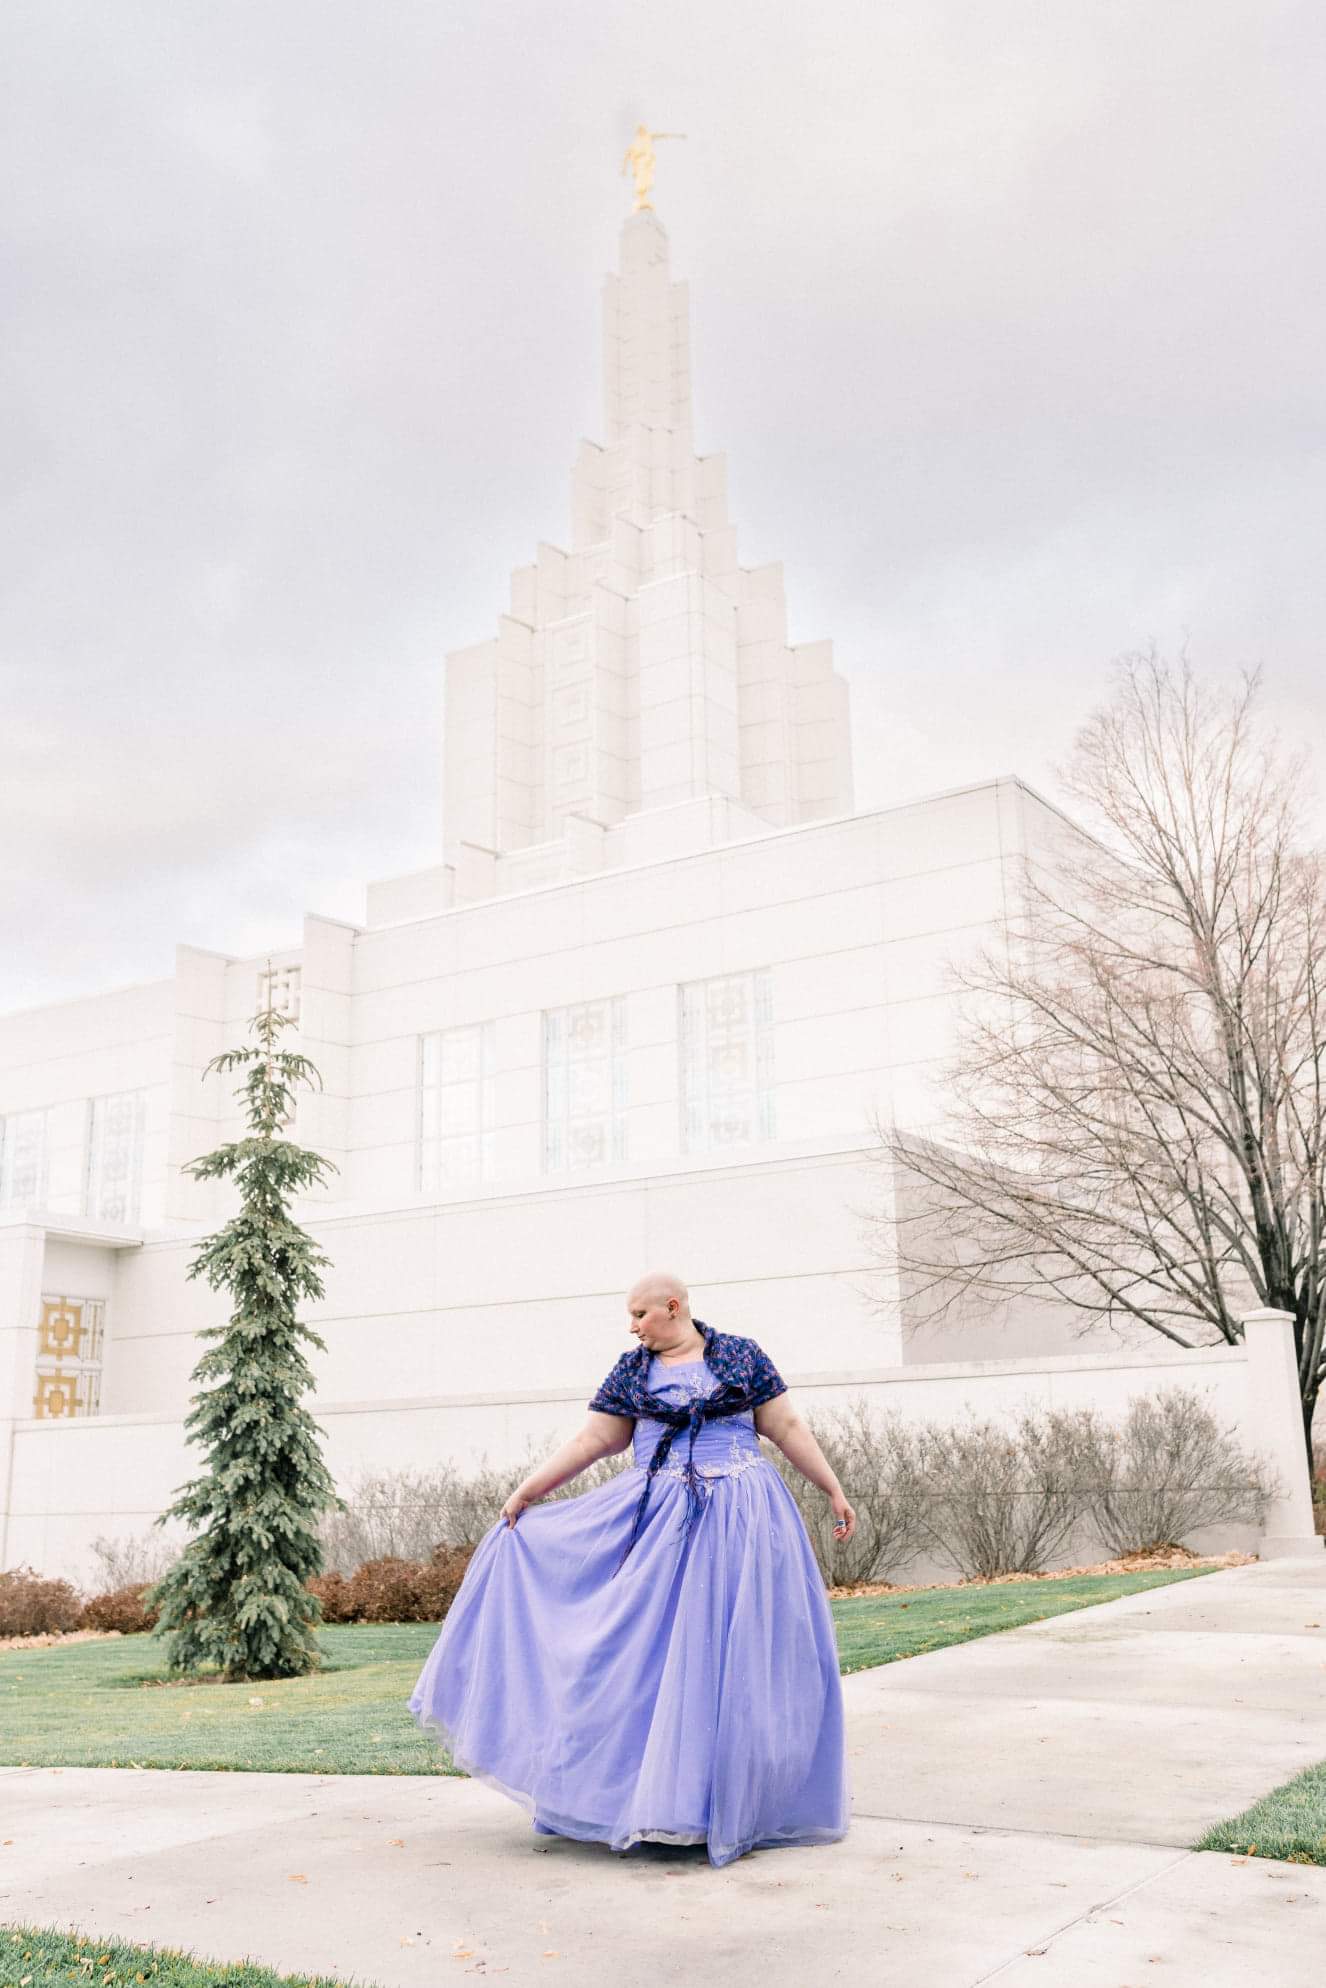 Cancer survivor from far away in a flowy purple gown with a large beautiful building behind her.